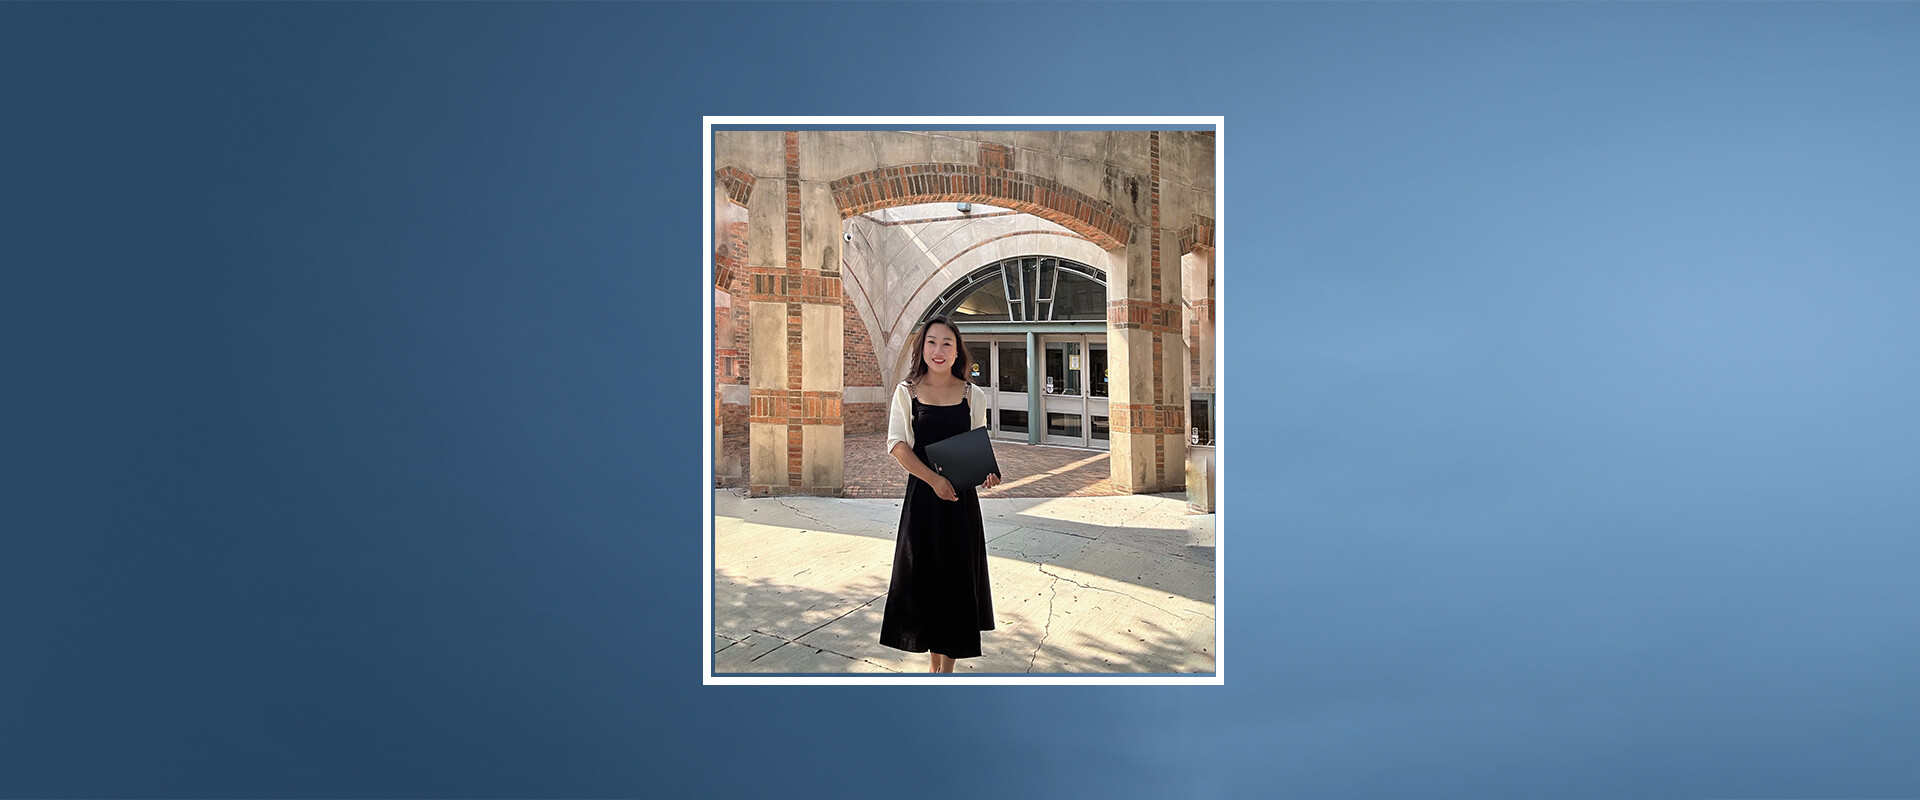 Yun Weixiao, Law Professor at Changchun Humanities Academy in China, is a Visiting Scholar at the St. Mary's University School of Law. She is standing in front of the Sarita Kenedy East Law Library on campus.